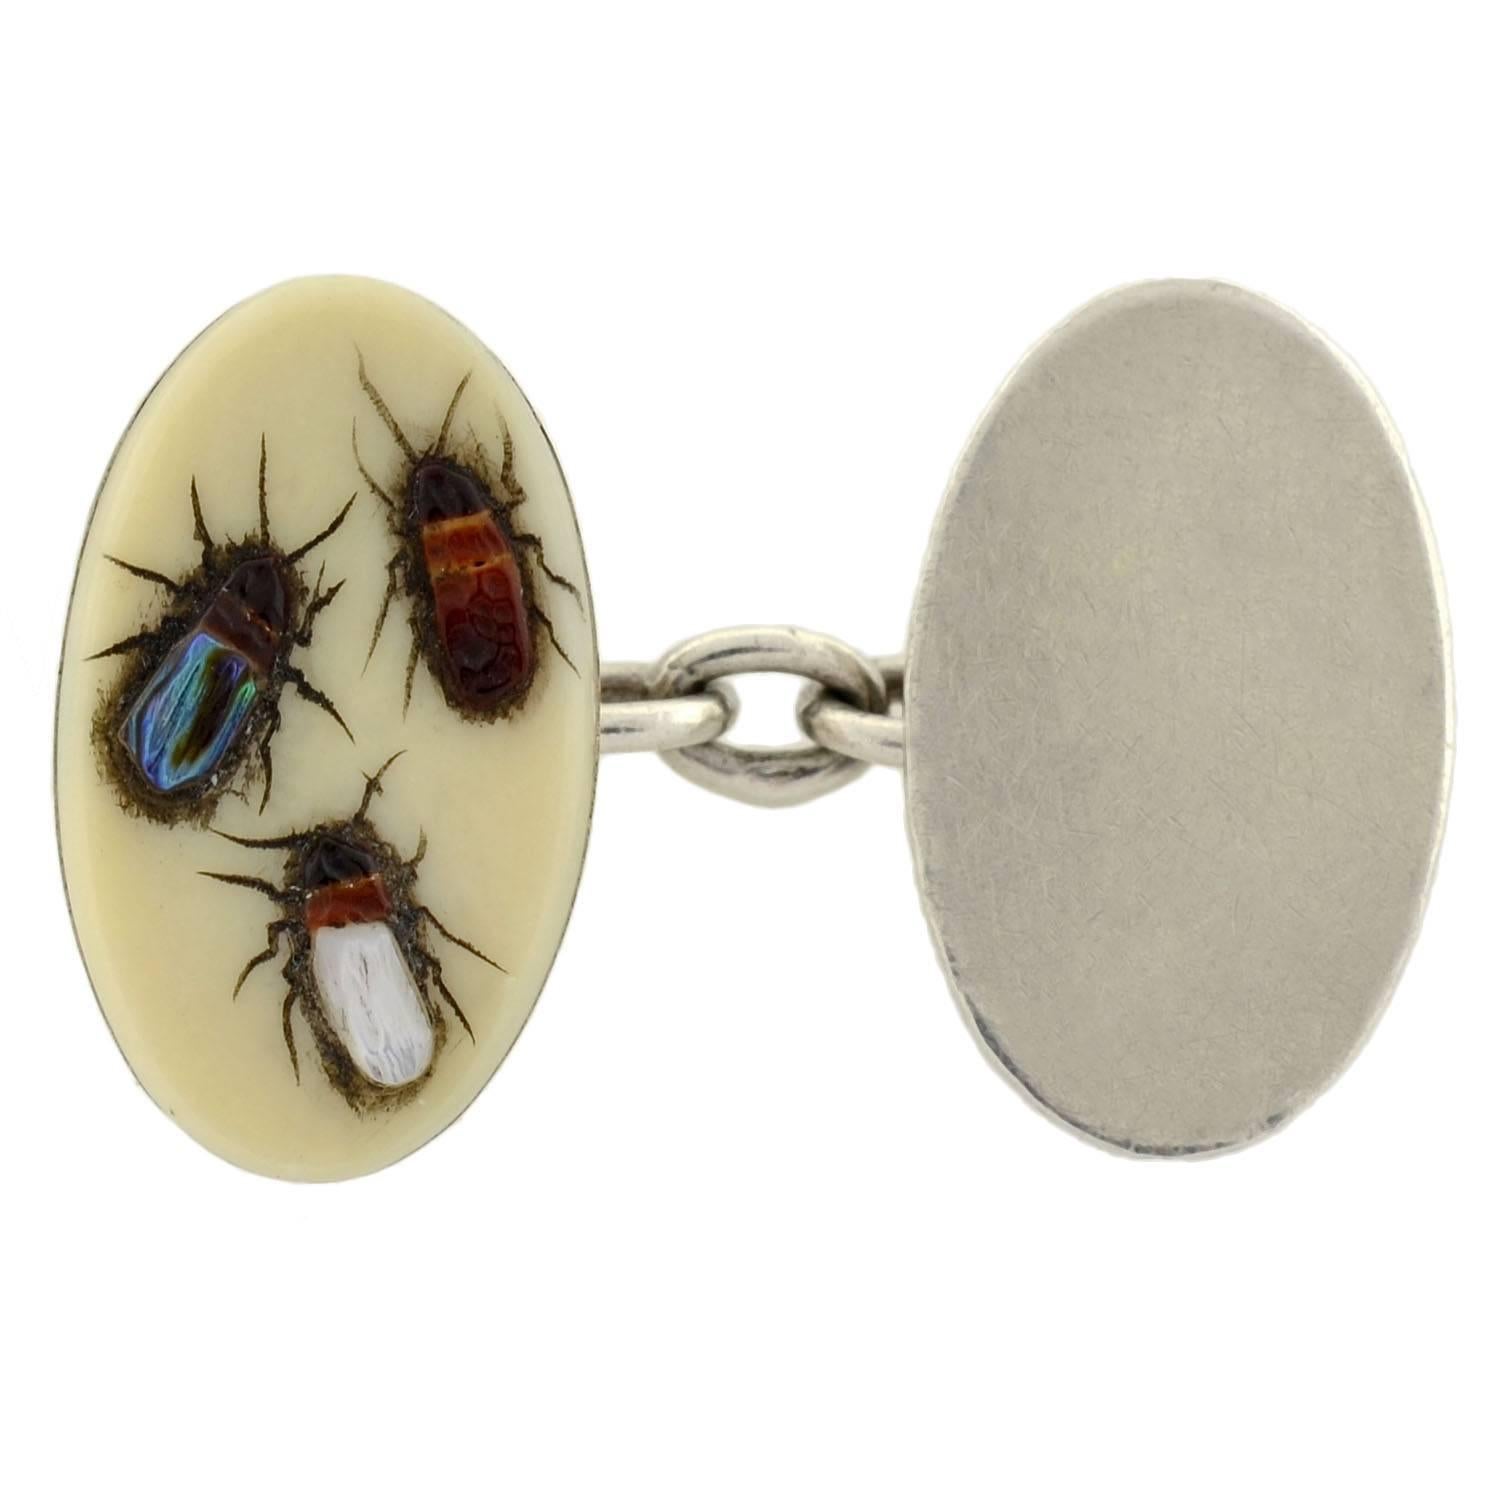 A wonderful and unusual pair of cufflinks from the Victorian era (ca1880)! Made of silver, the double-sided cufflinks have a colorful insect motif inlaid into a smooth bone background. The insects' legs and antennae are etched delicately into the